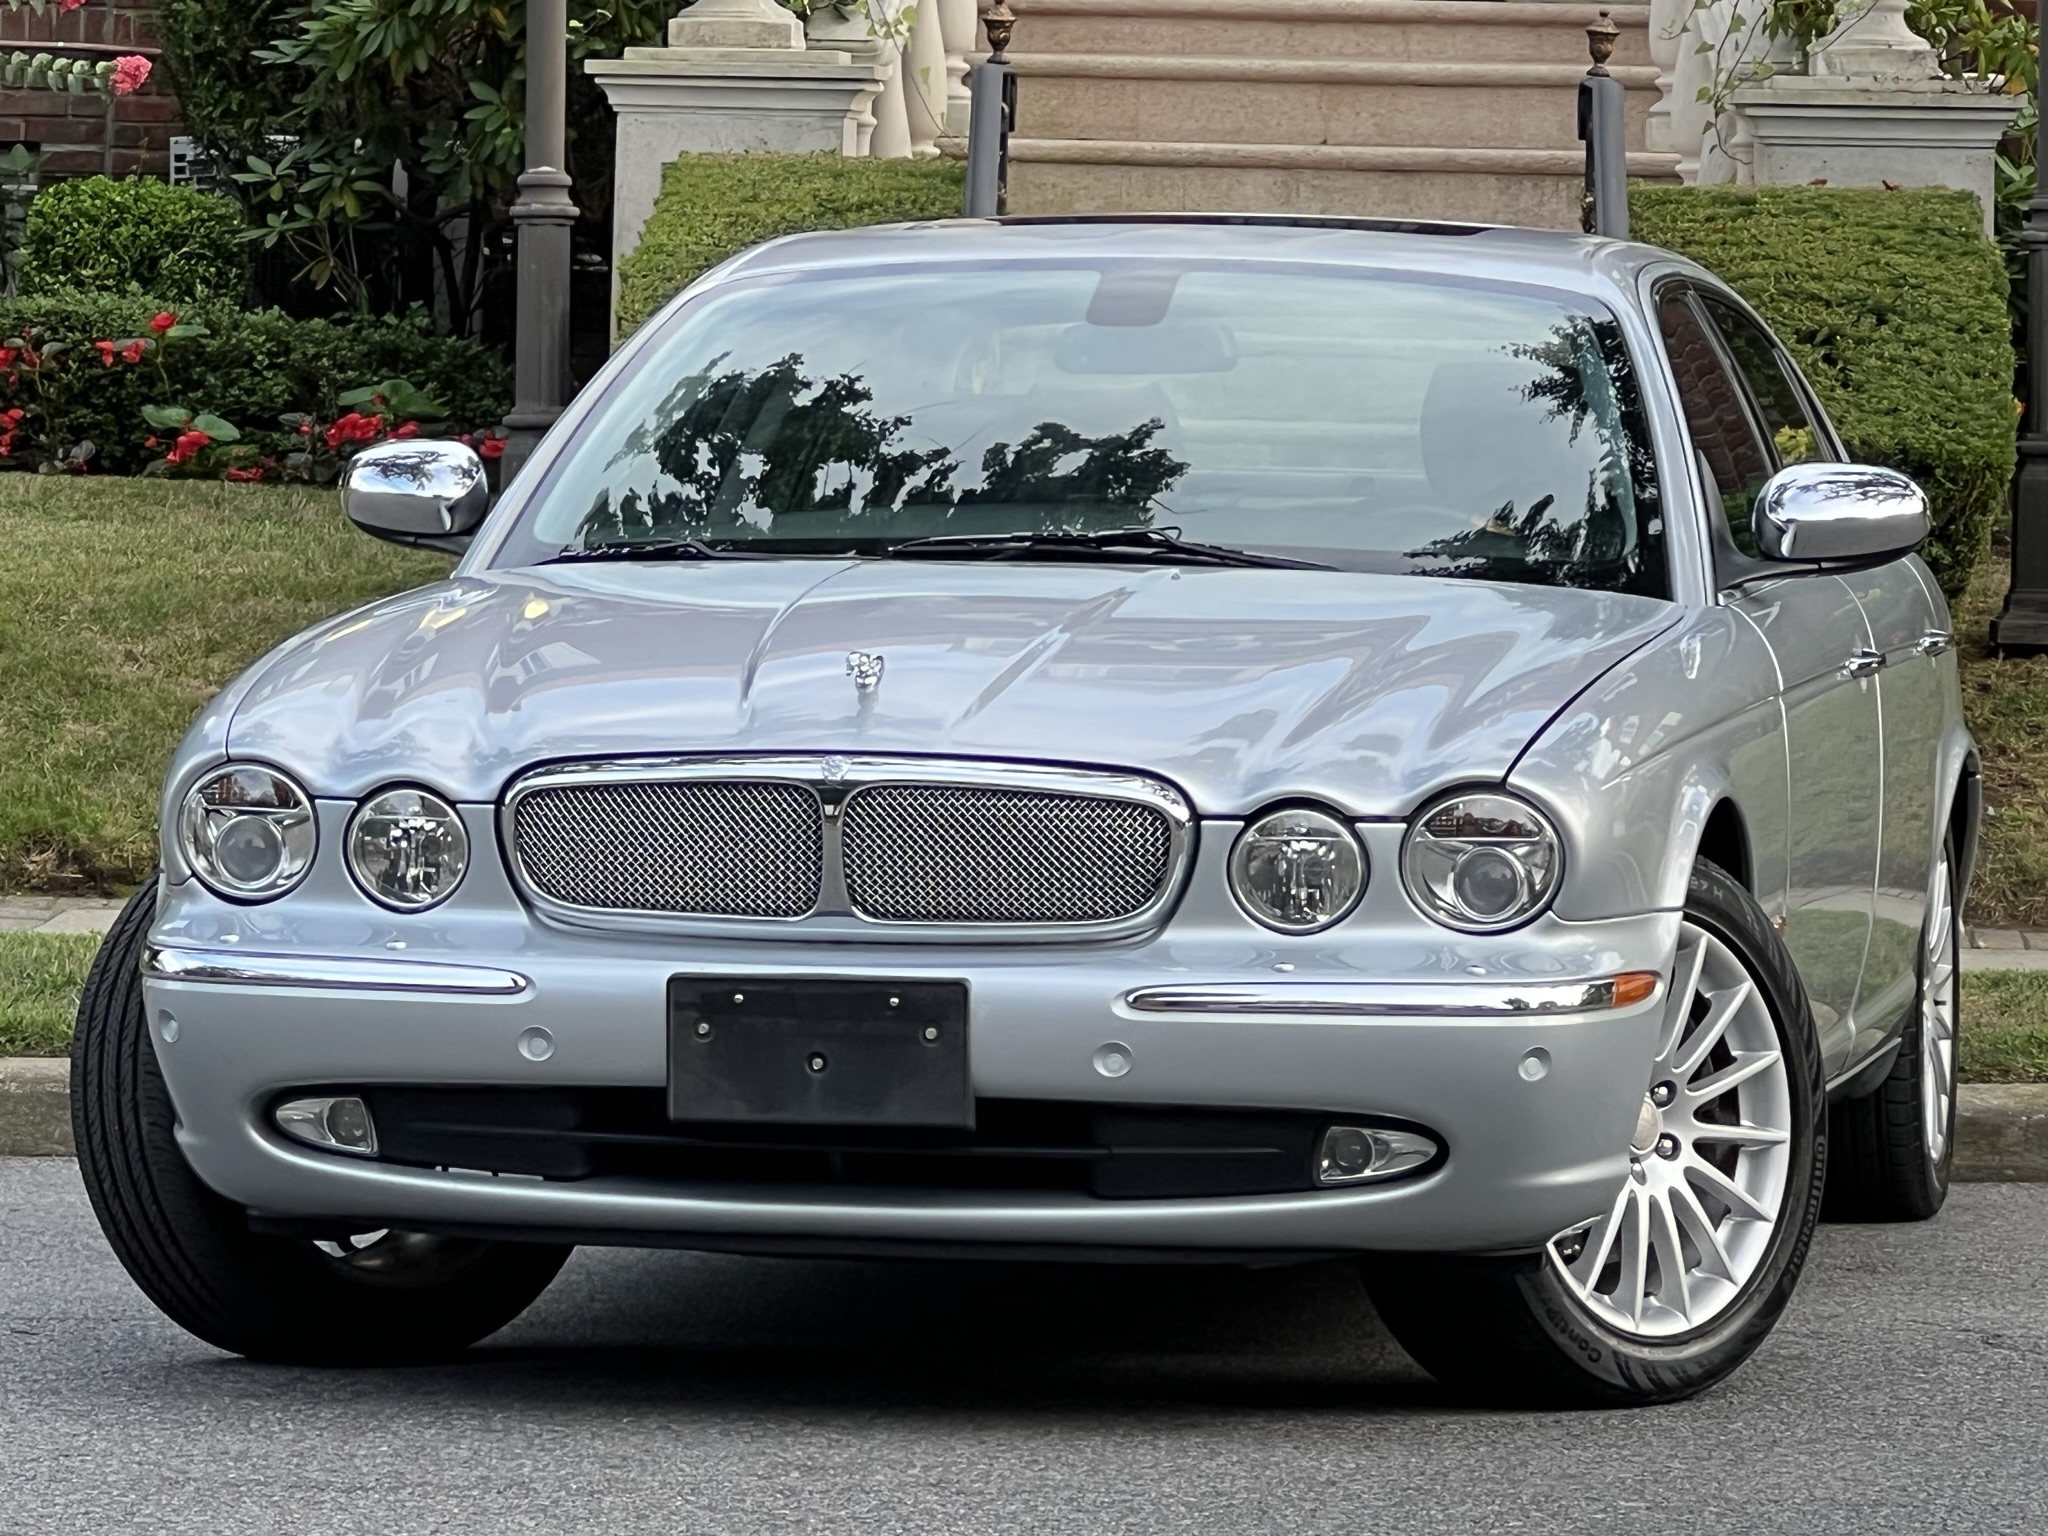 Buy Used 2007 JAGUAR XJ8 L for $14 900 from trusted dealer in Brooklyn, NY!